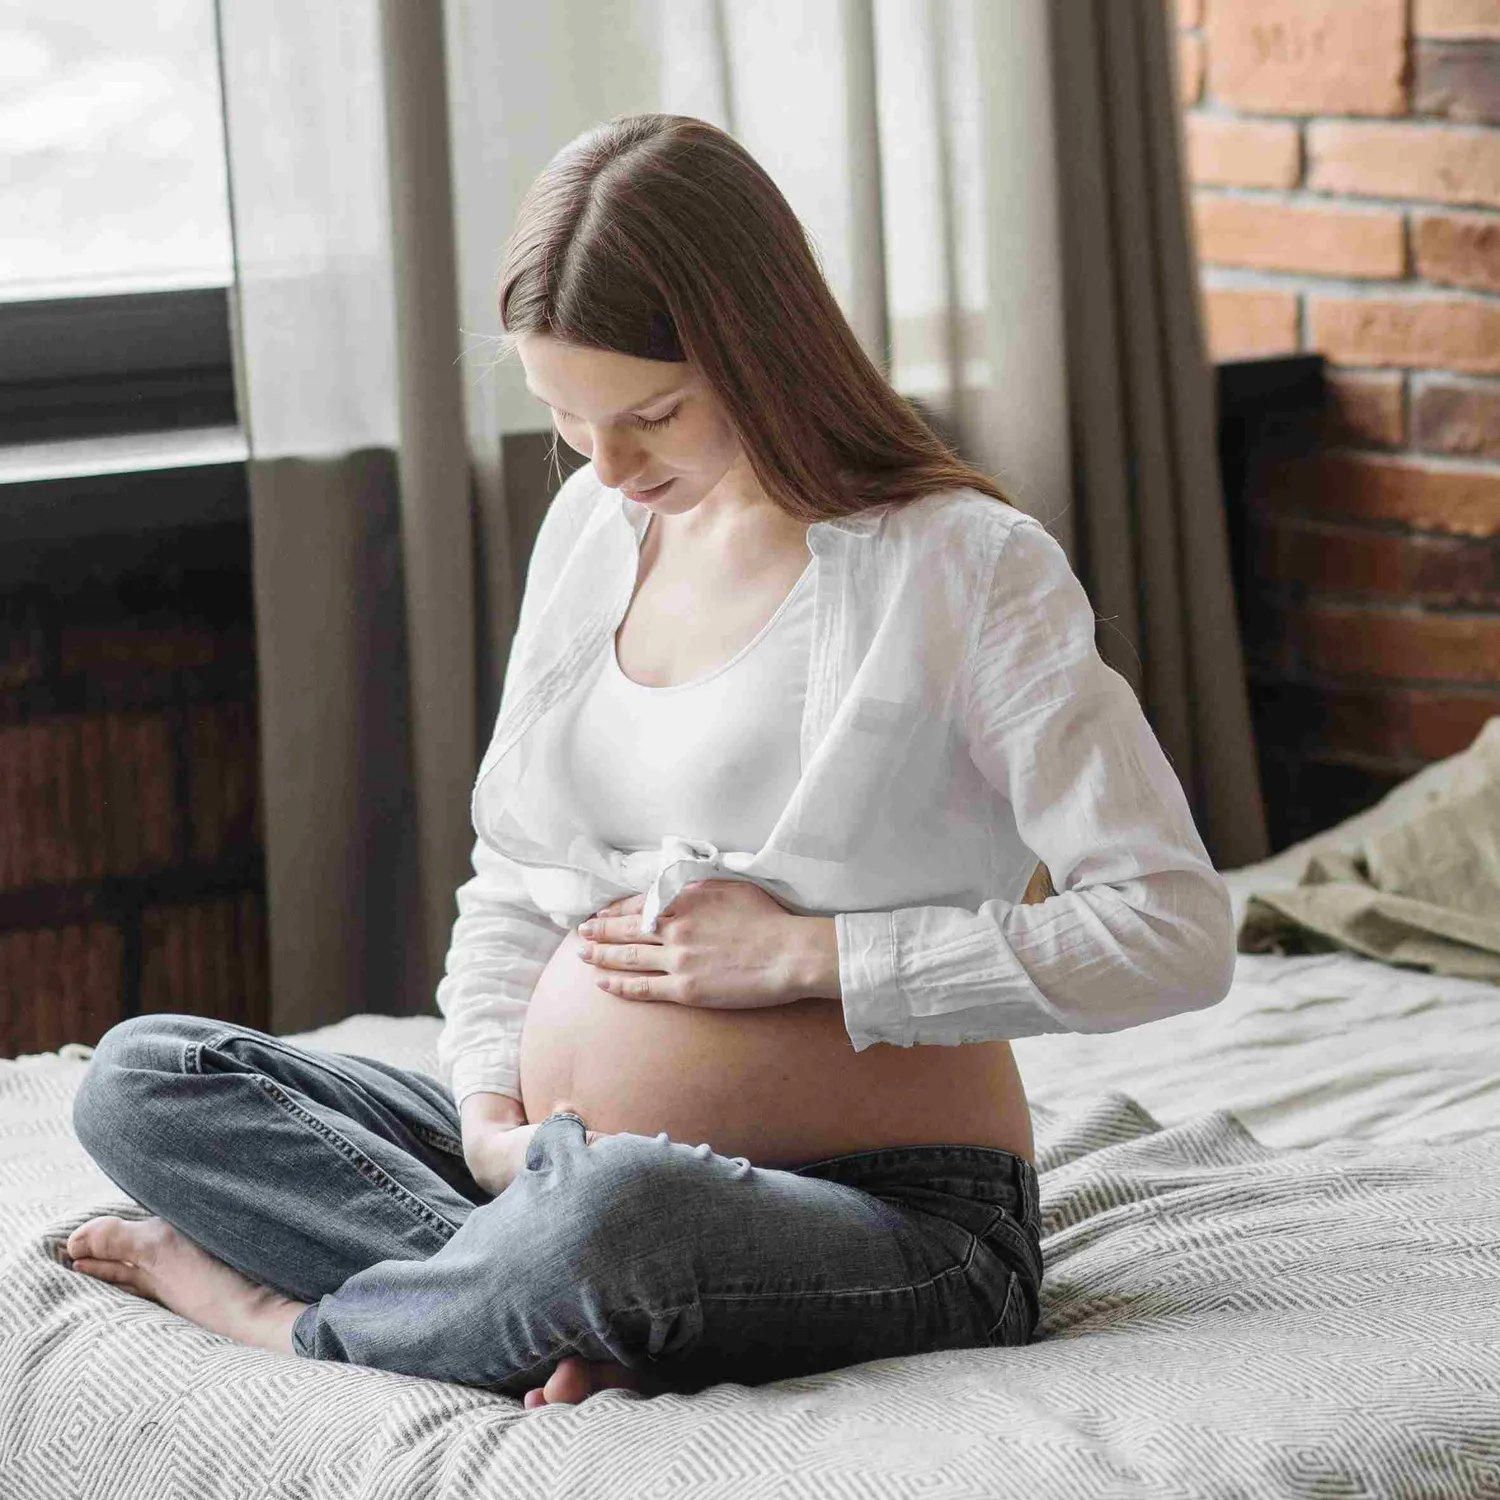 How to feel confident in your pregnant body?